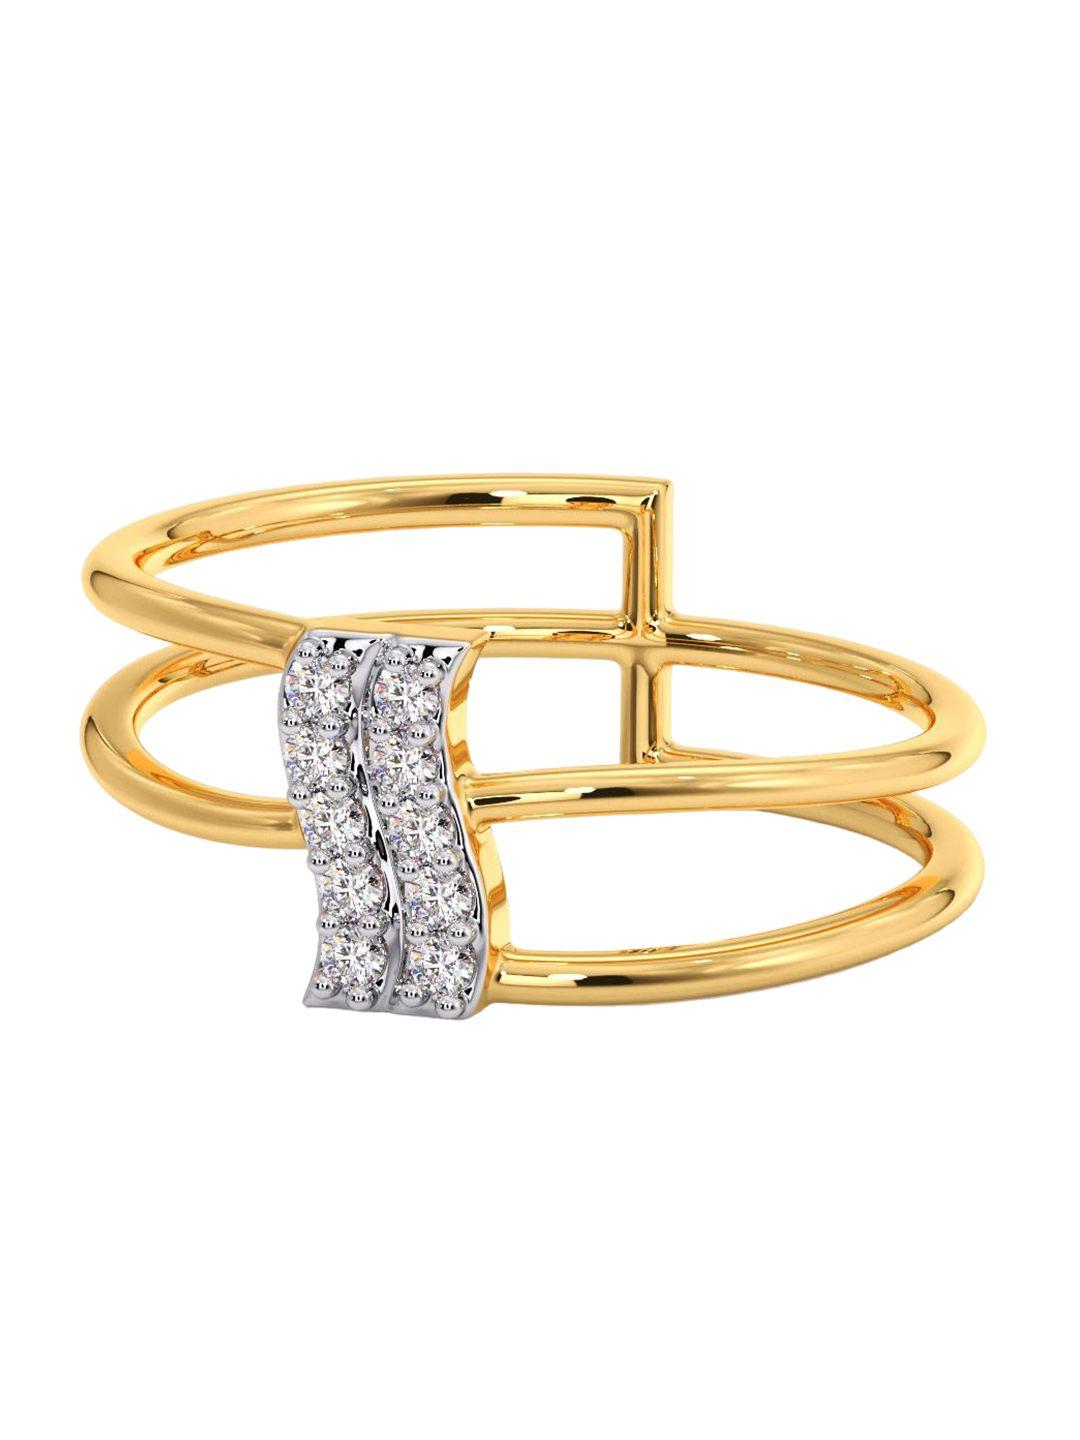 candere a kalyan jewellers company 14kt gold diamondring - 1.68 gm